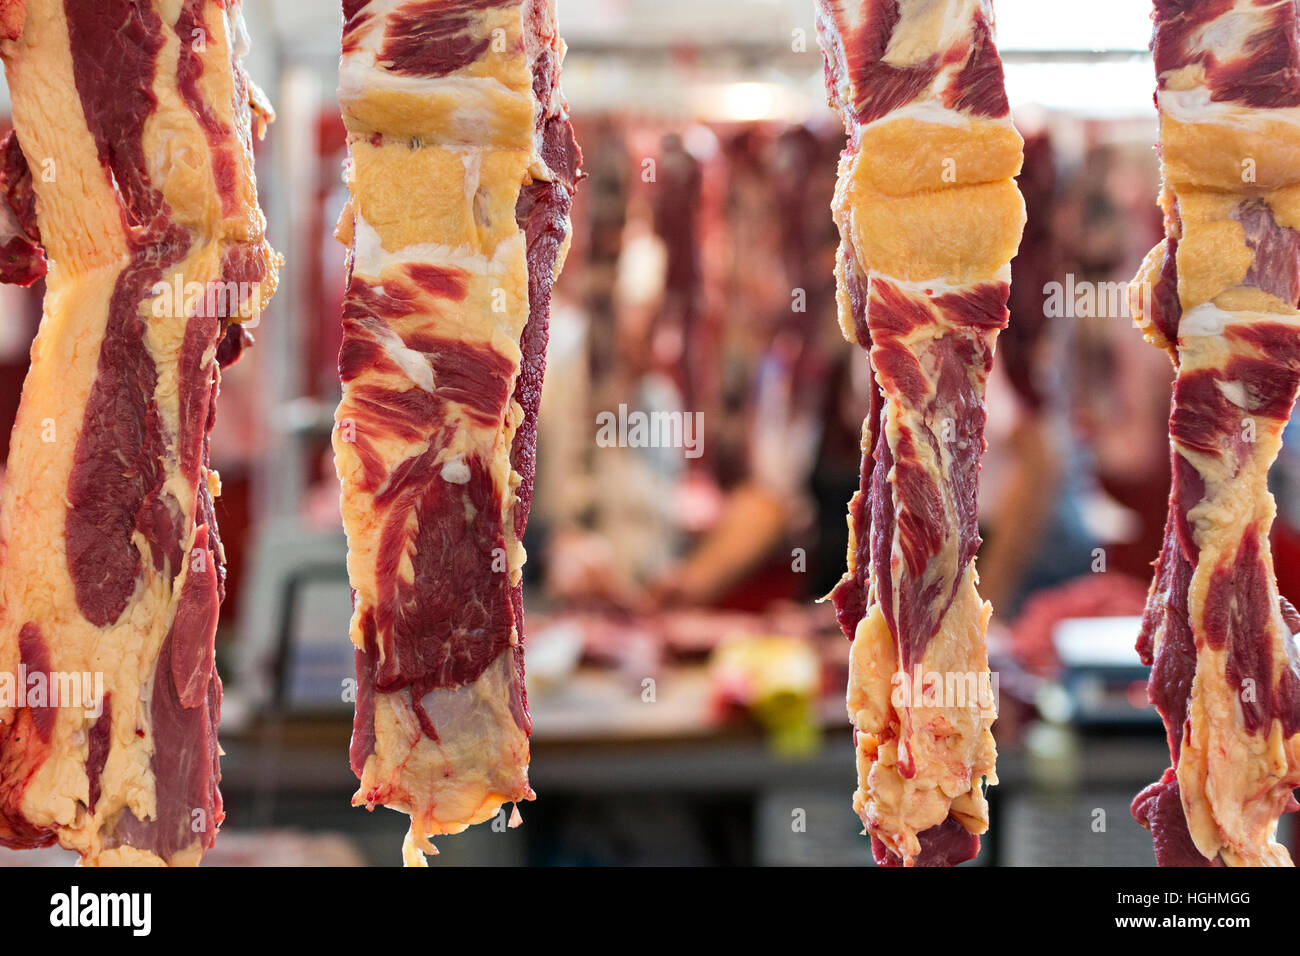 Meat hanging in the meat market Stock Photo